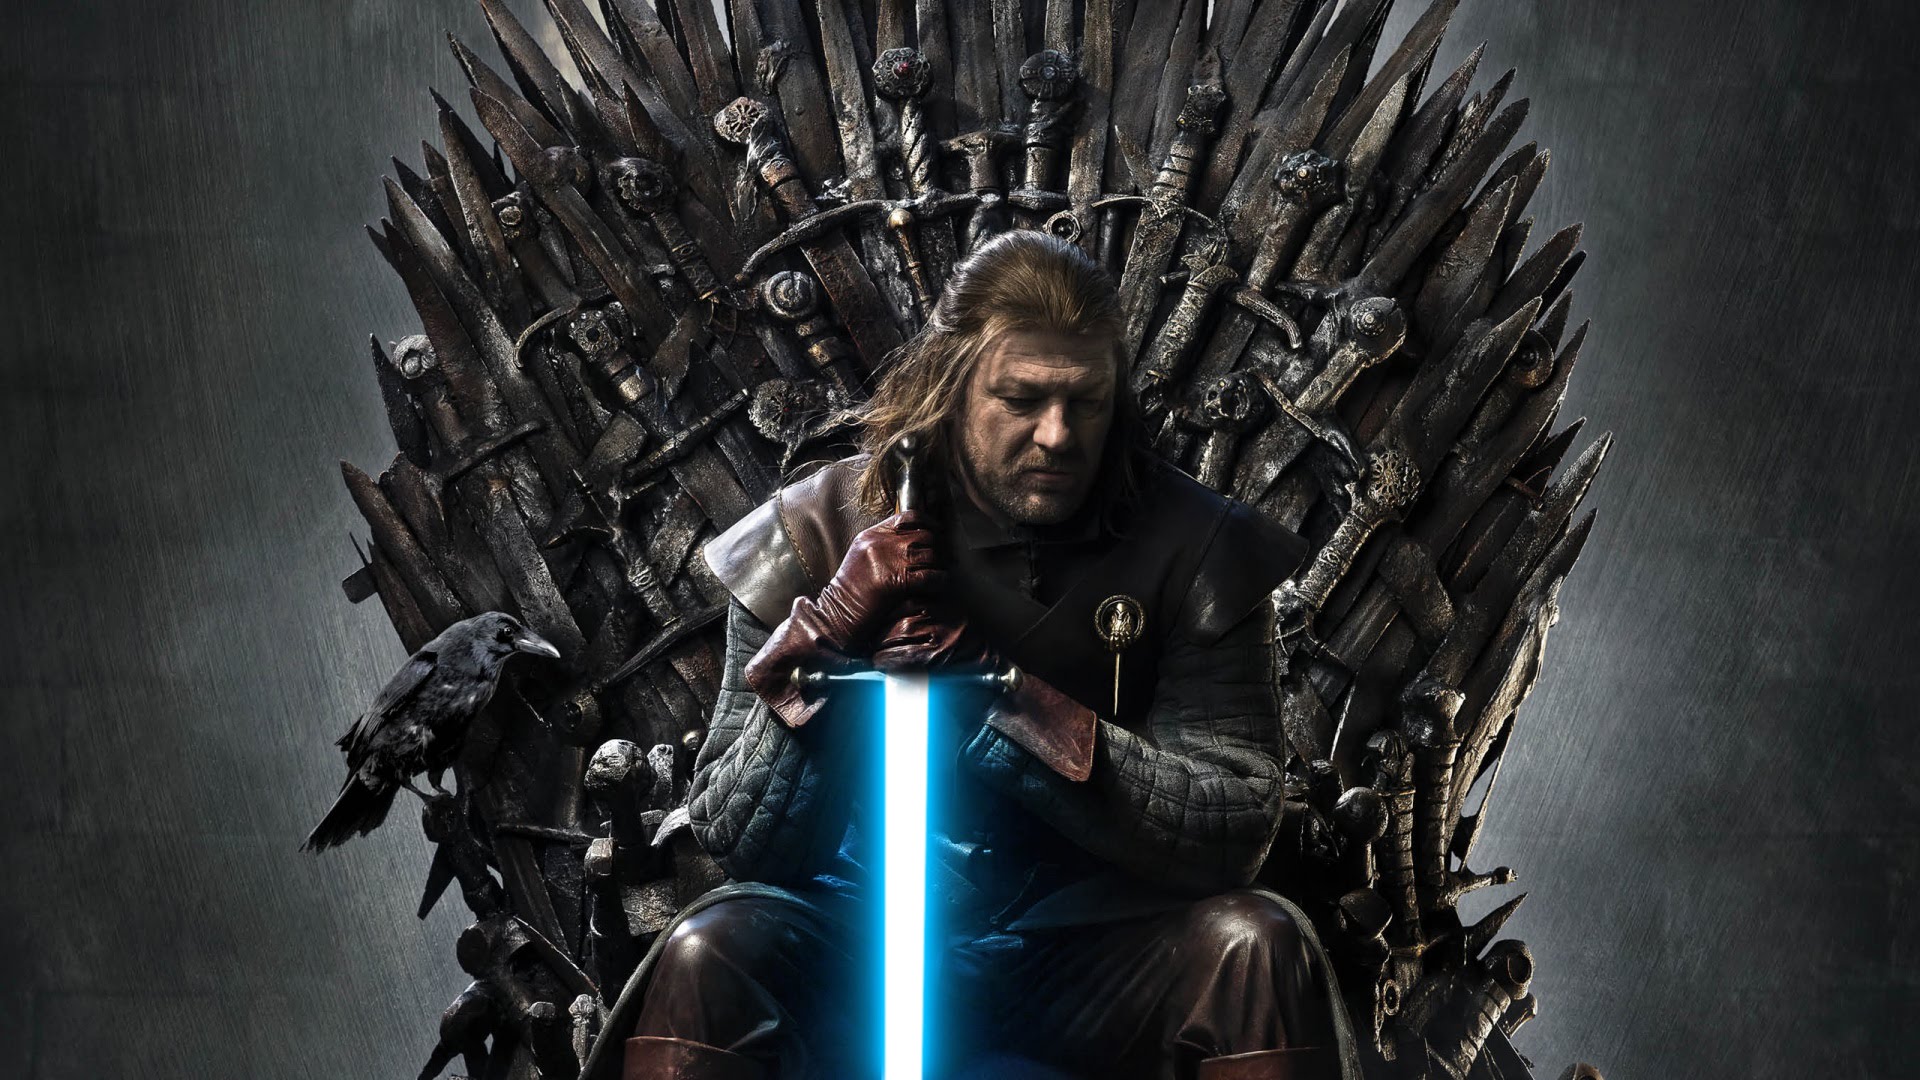 Confirmed: Game of Thrones Dudes Are Making The Next Star Wars